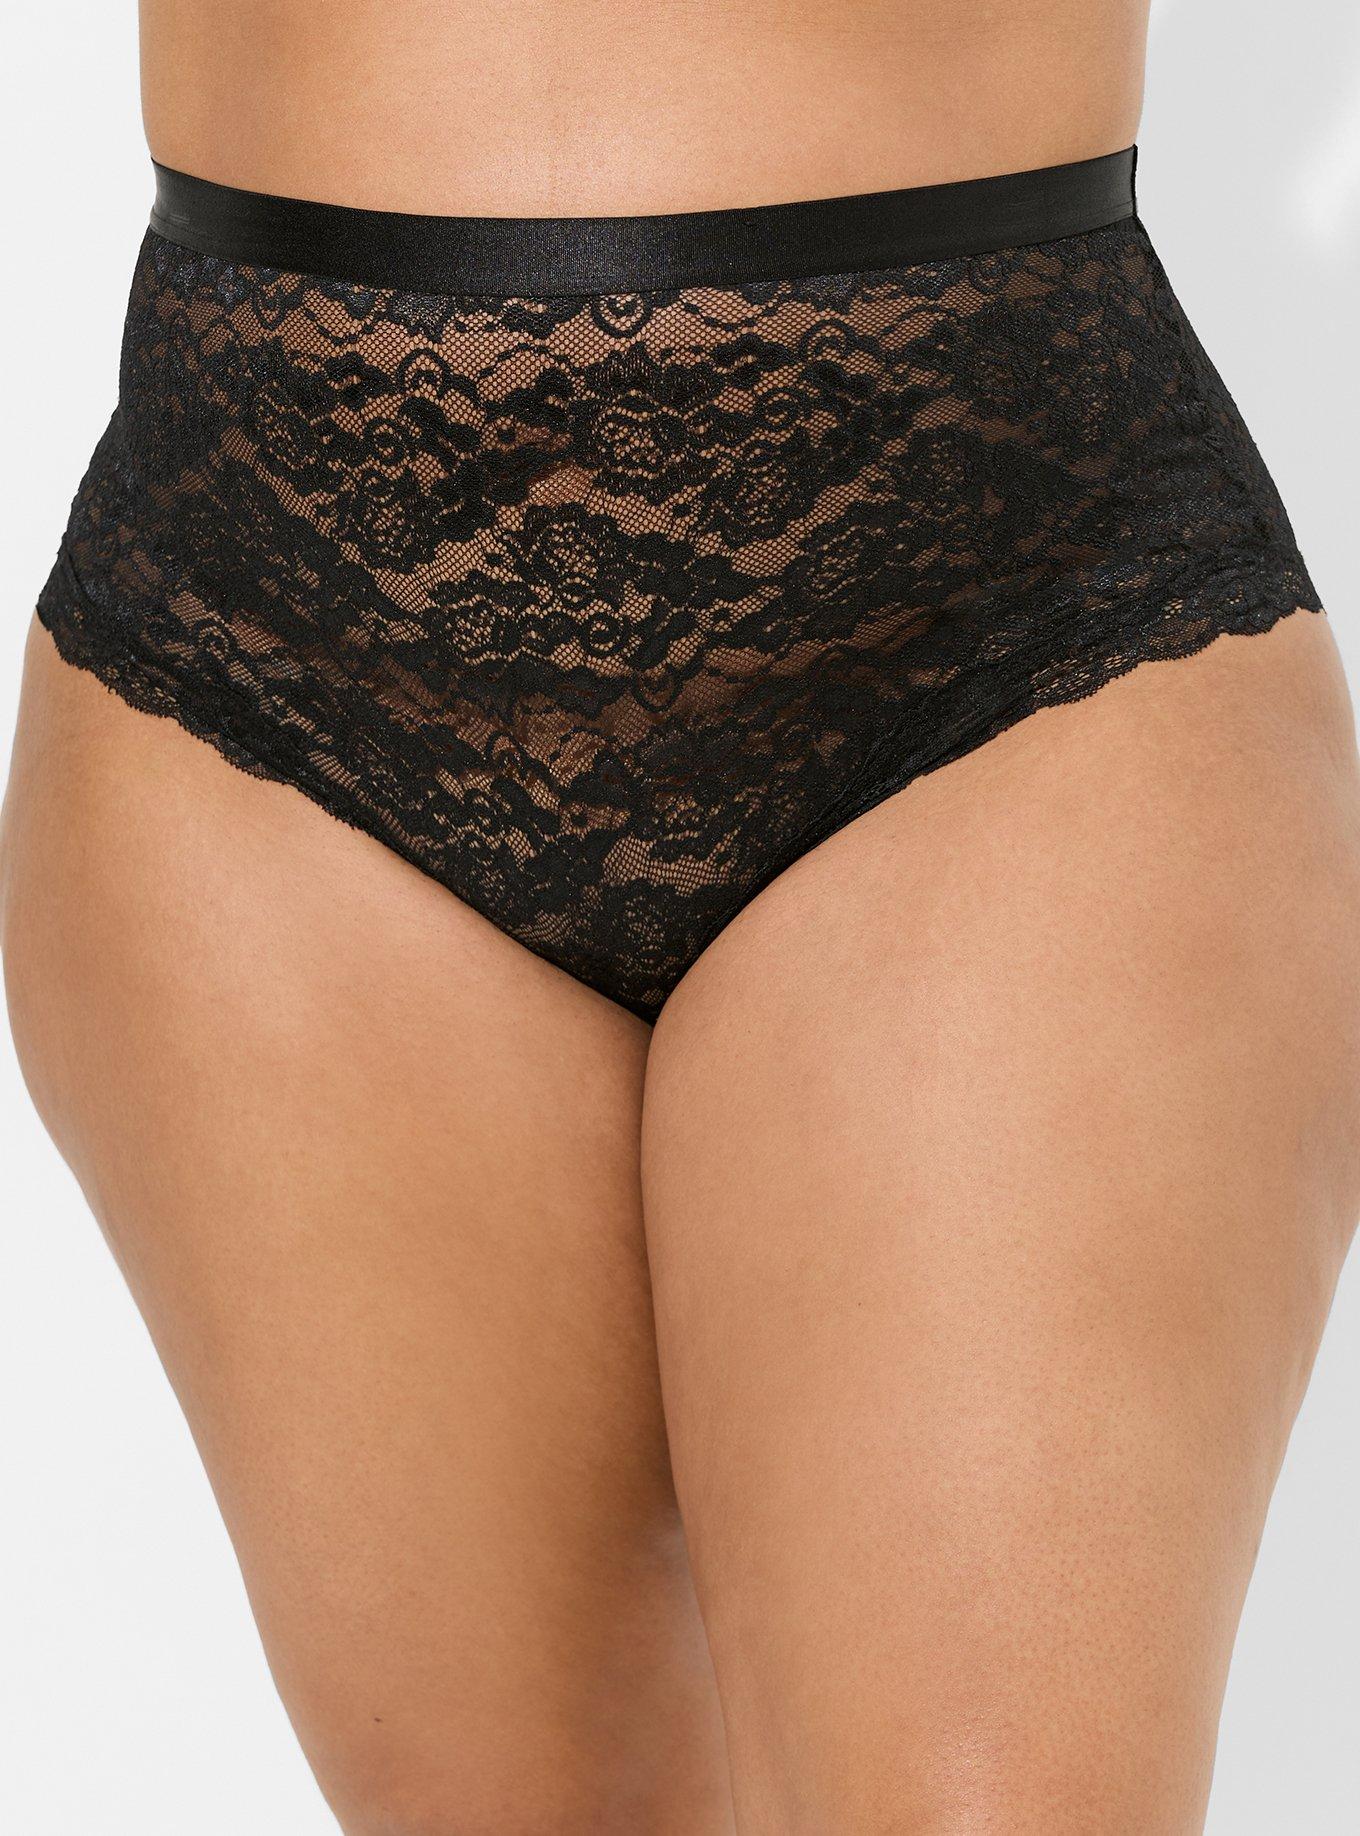 Plus Size - Shine And Lace High-Rise Cheeky Panty - Torrid